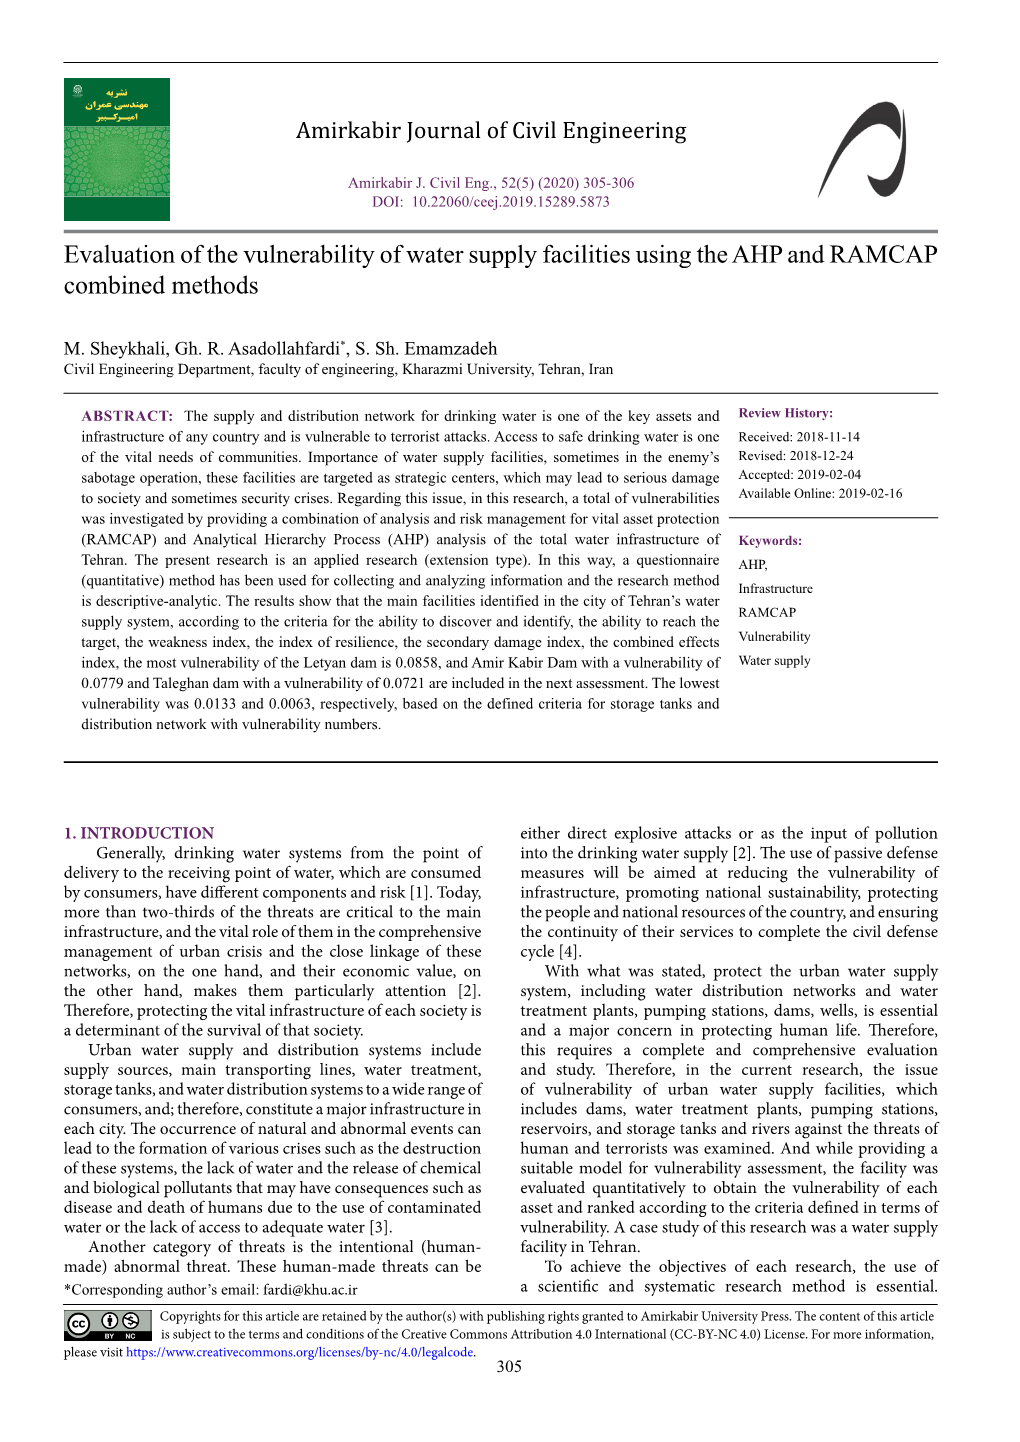 Evaluation of the Vulnerability of Water Supply Facilities Using the AHP and RAMCAP Combined Methods